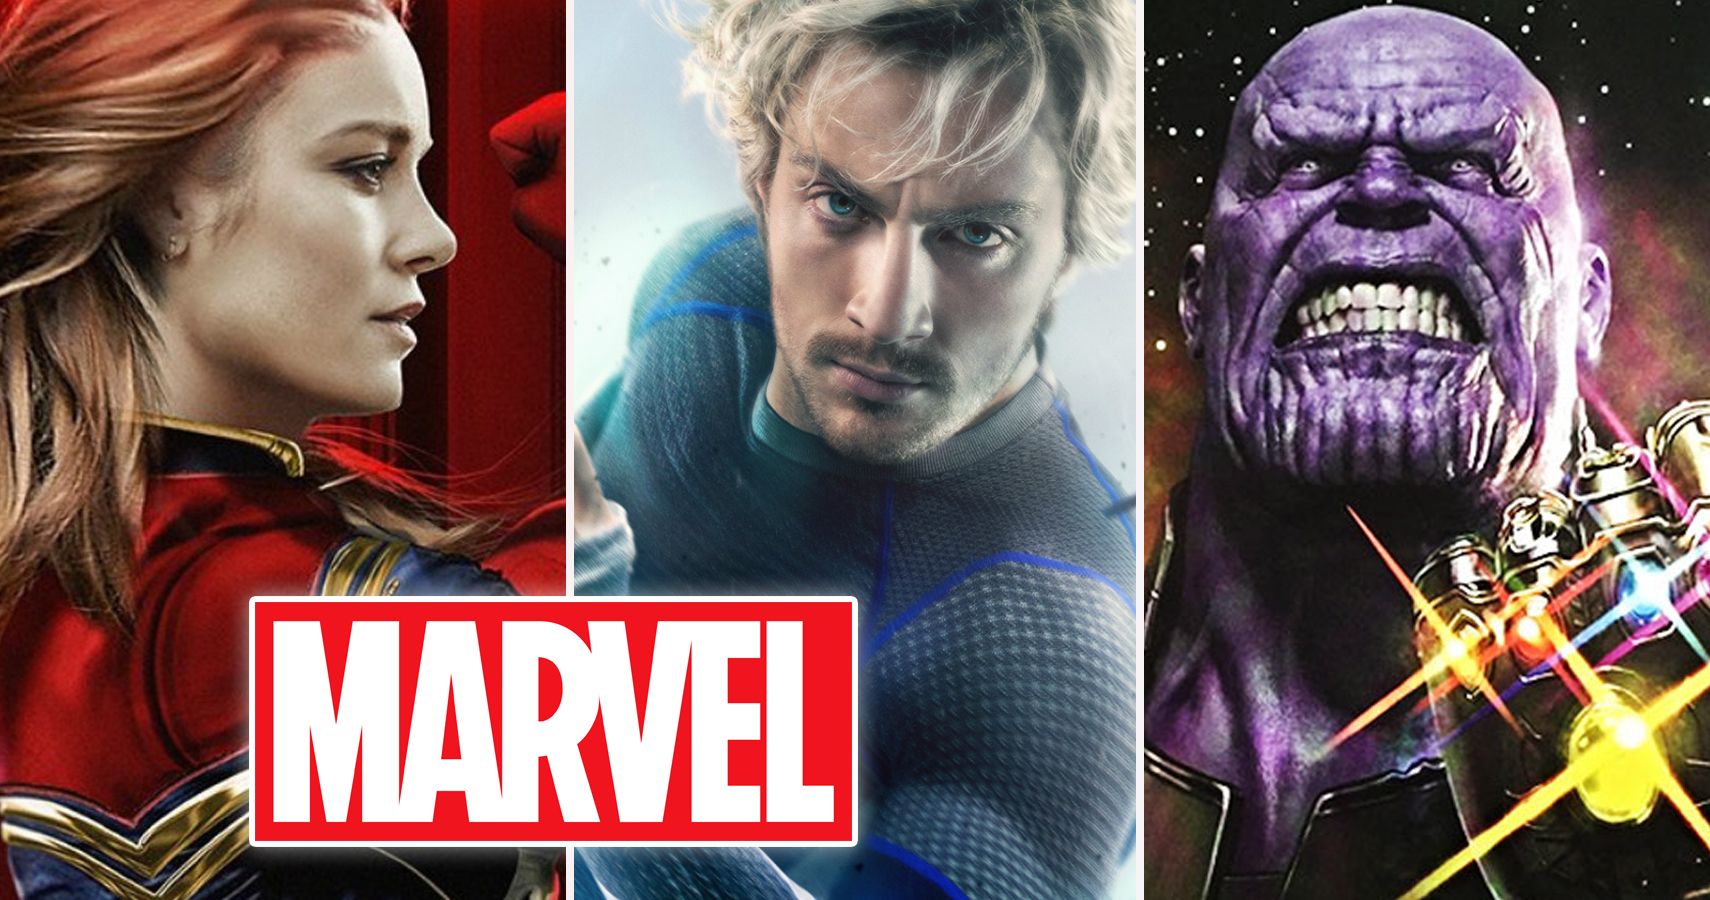 Marvel 10 Characters Rumored For Avengers 4 (And 10 That Are Confirmed)